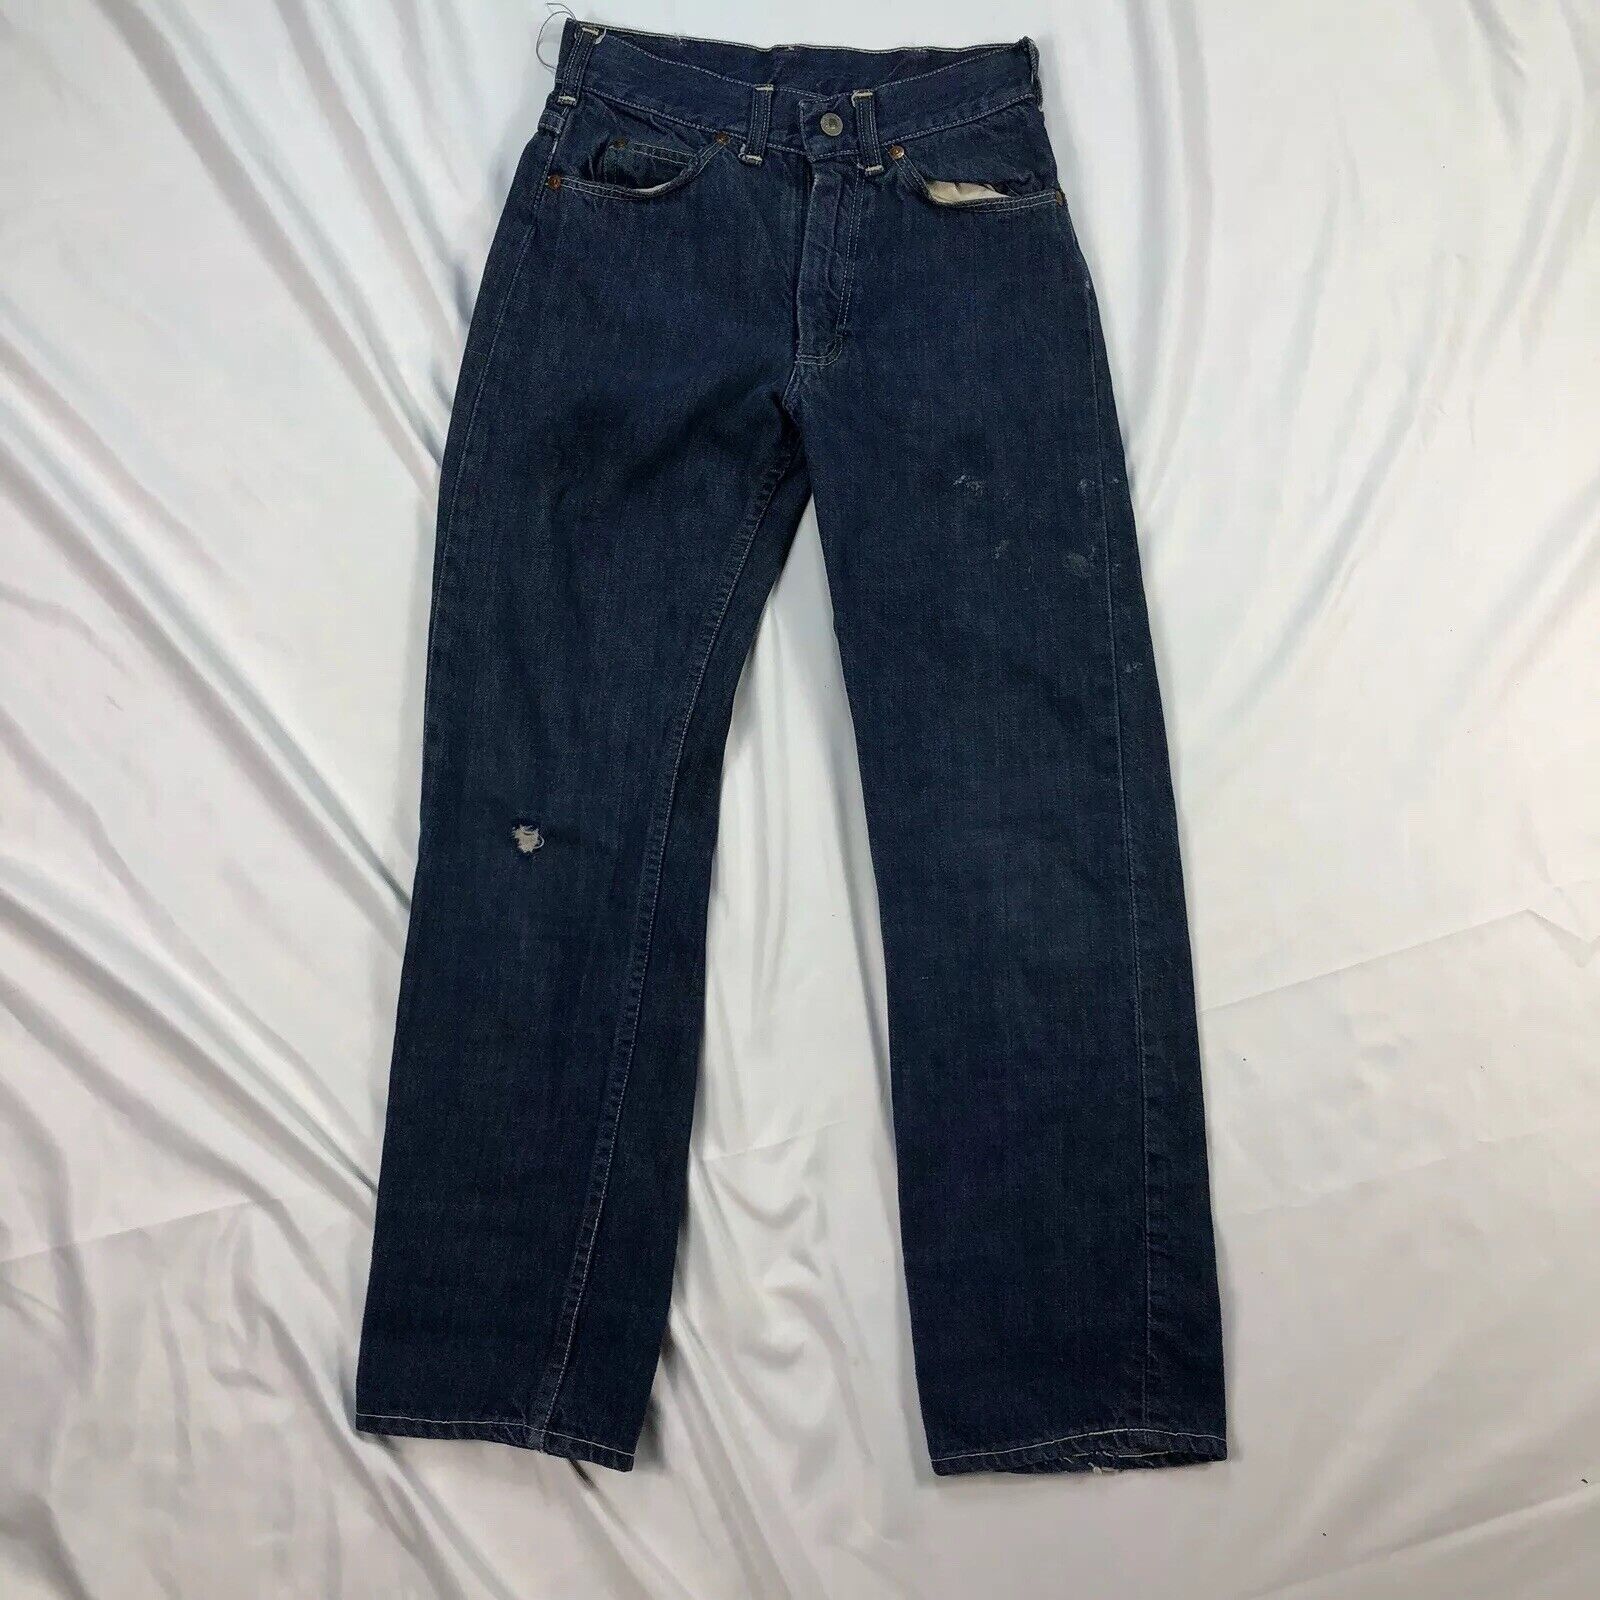 1950s Vintage Jc Penny Foremost Denim Jeans 25x28 Small